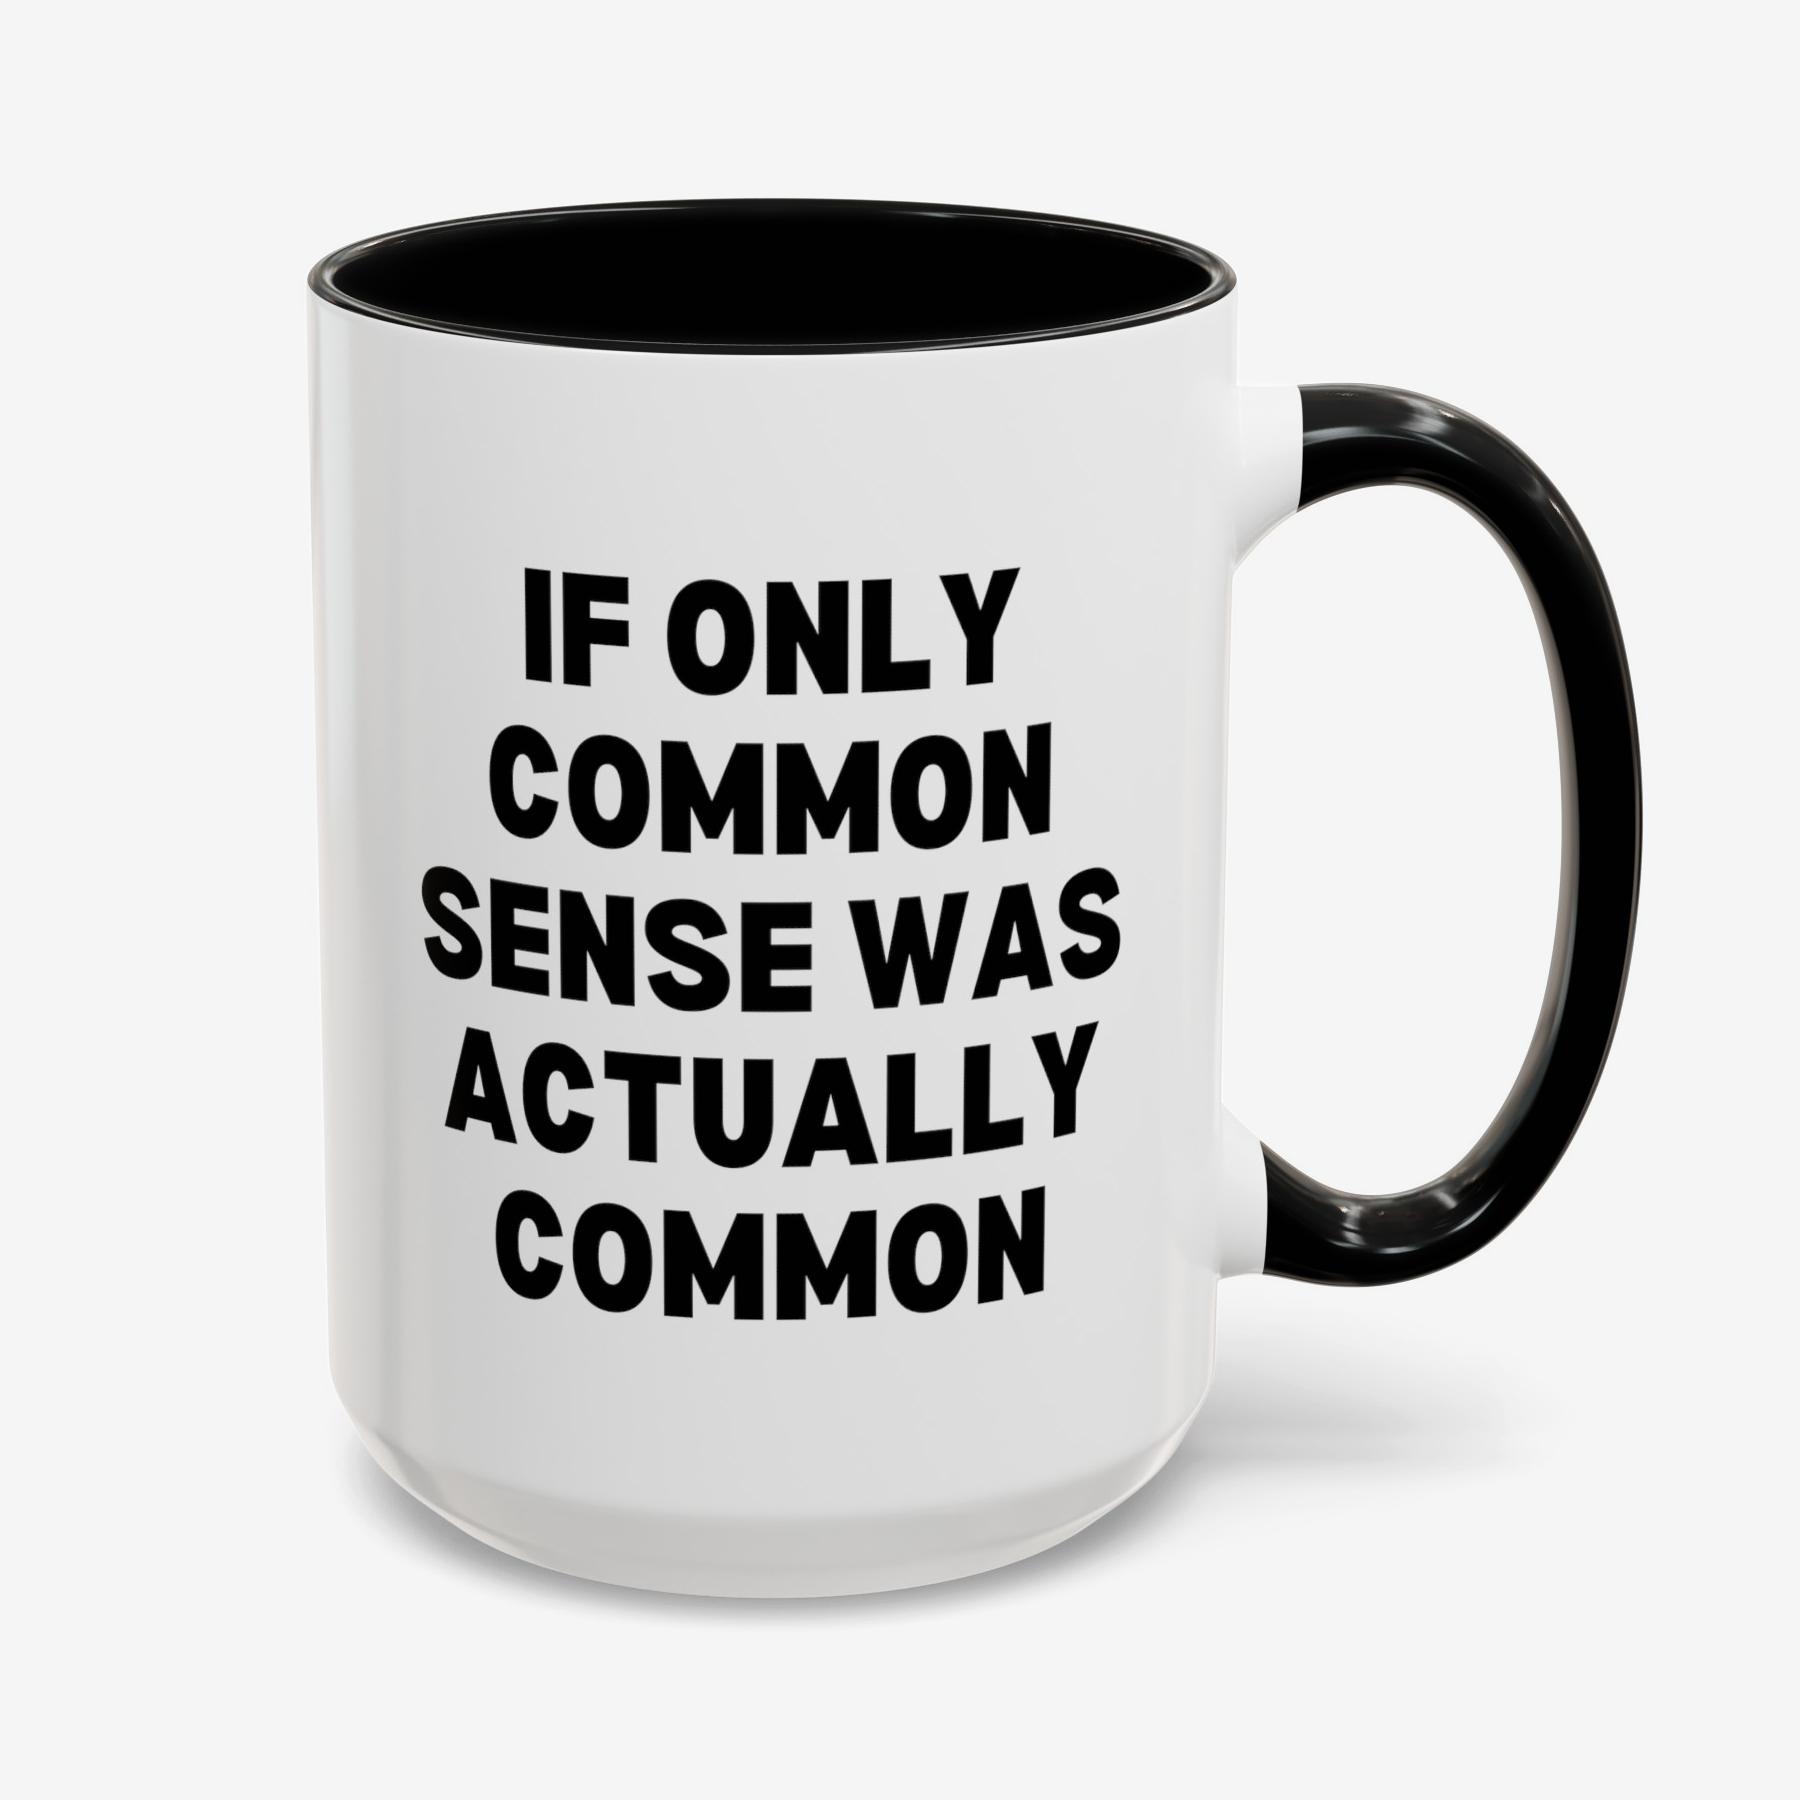 If Only Common Sense Was Actually Common 15oz white with black accent funny large coffee mug gift for morning person coworker secret santa sarcasm sarcastic waveywares wavey wares wavywares wavy wares cover